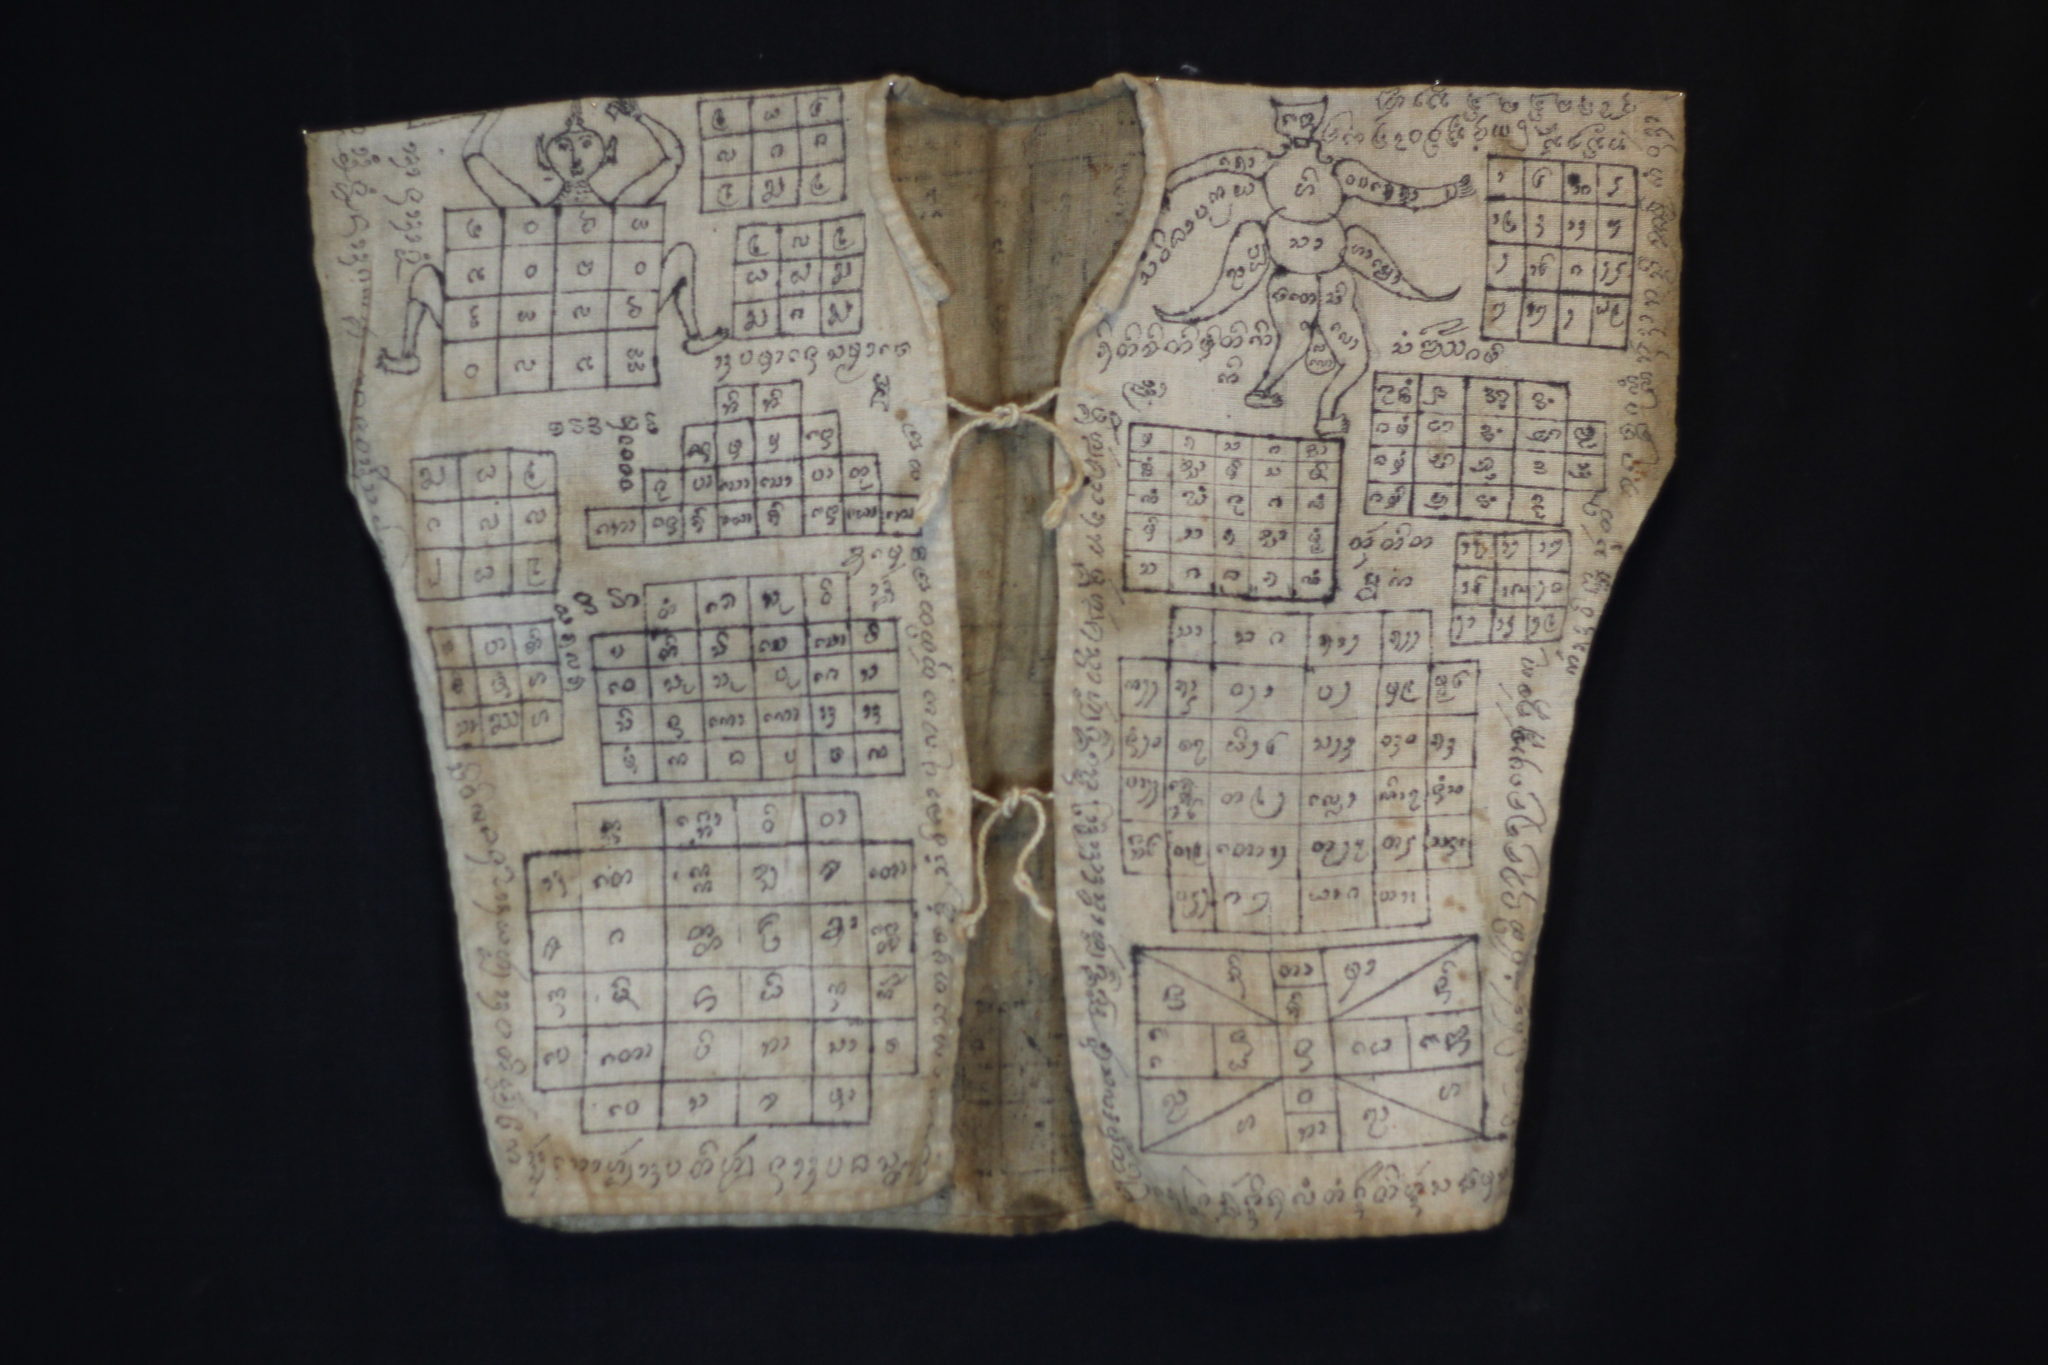 Amulet Yantra Vest Nong Pho, Thailand Vietnamese shaman Mid to late 19th c. Cotton, pigment Handmade and drawn by the shaman It is endowed with prayers, signs, numbers and a depiction of the great guru monk Luang Phor Doem. The sacred cloth is an undergarment worn as a talisman with great protective power against physical harm, like bullets, spears, knives, wild animals and evil spirits. 19” x 22” $2,900.